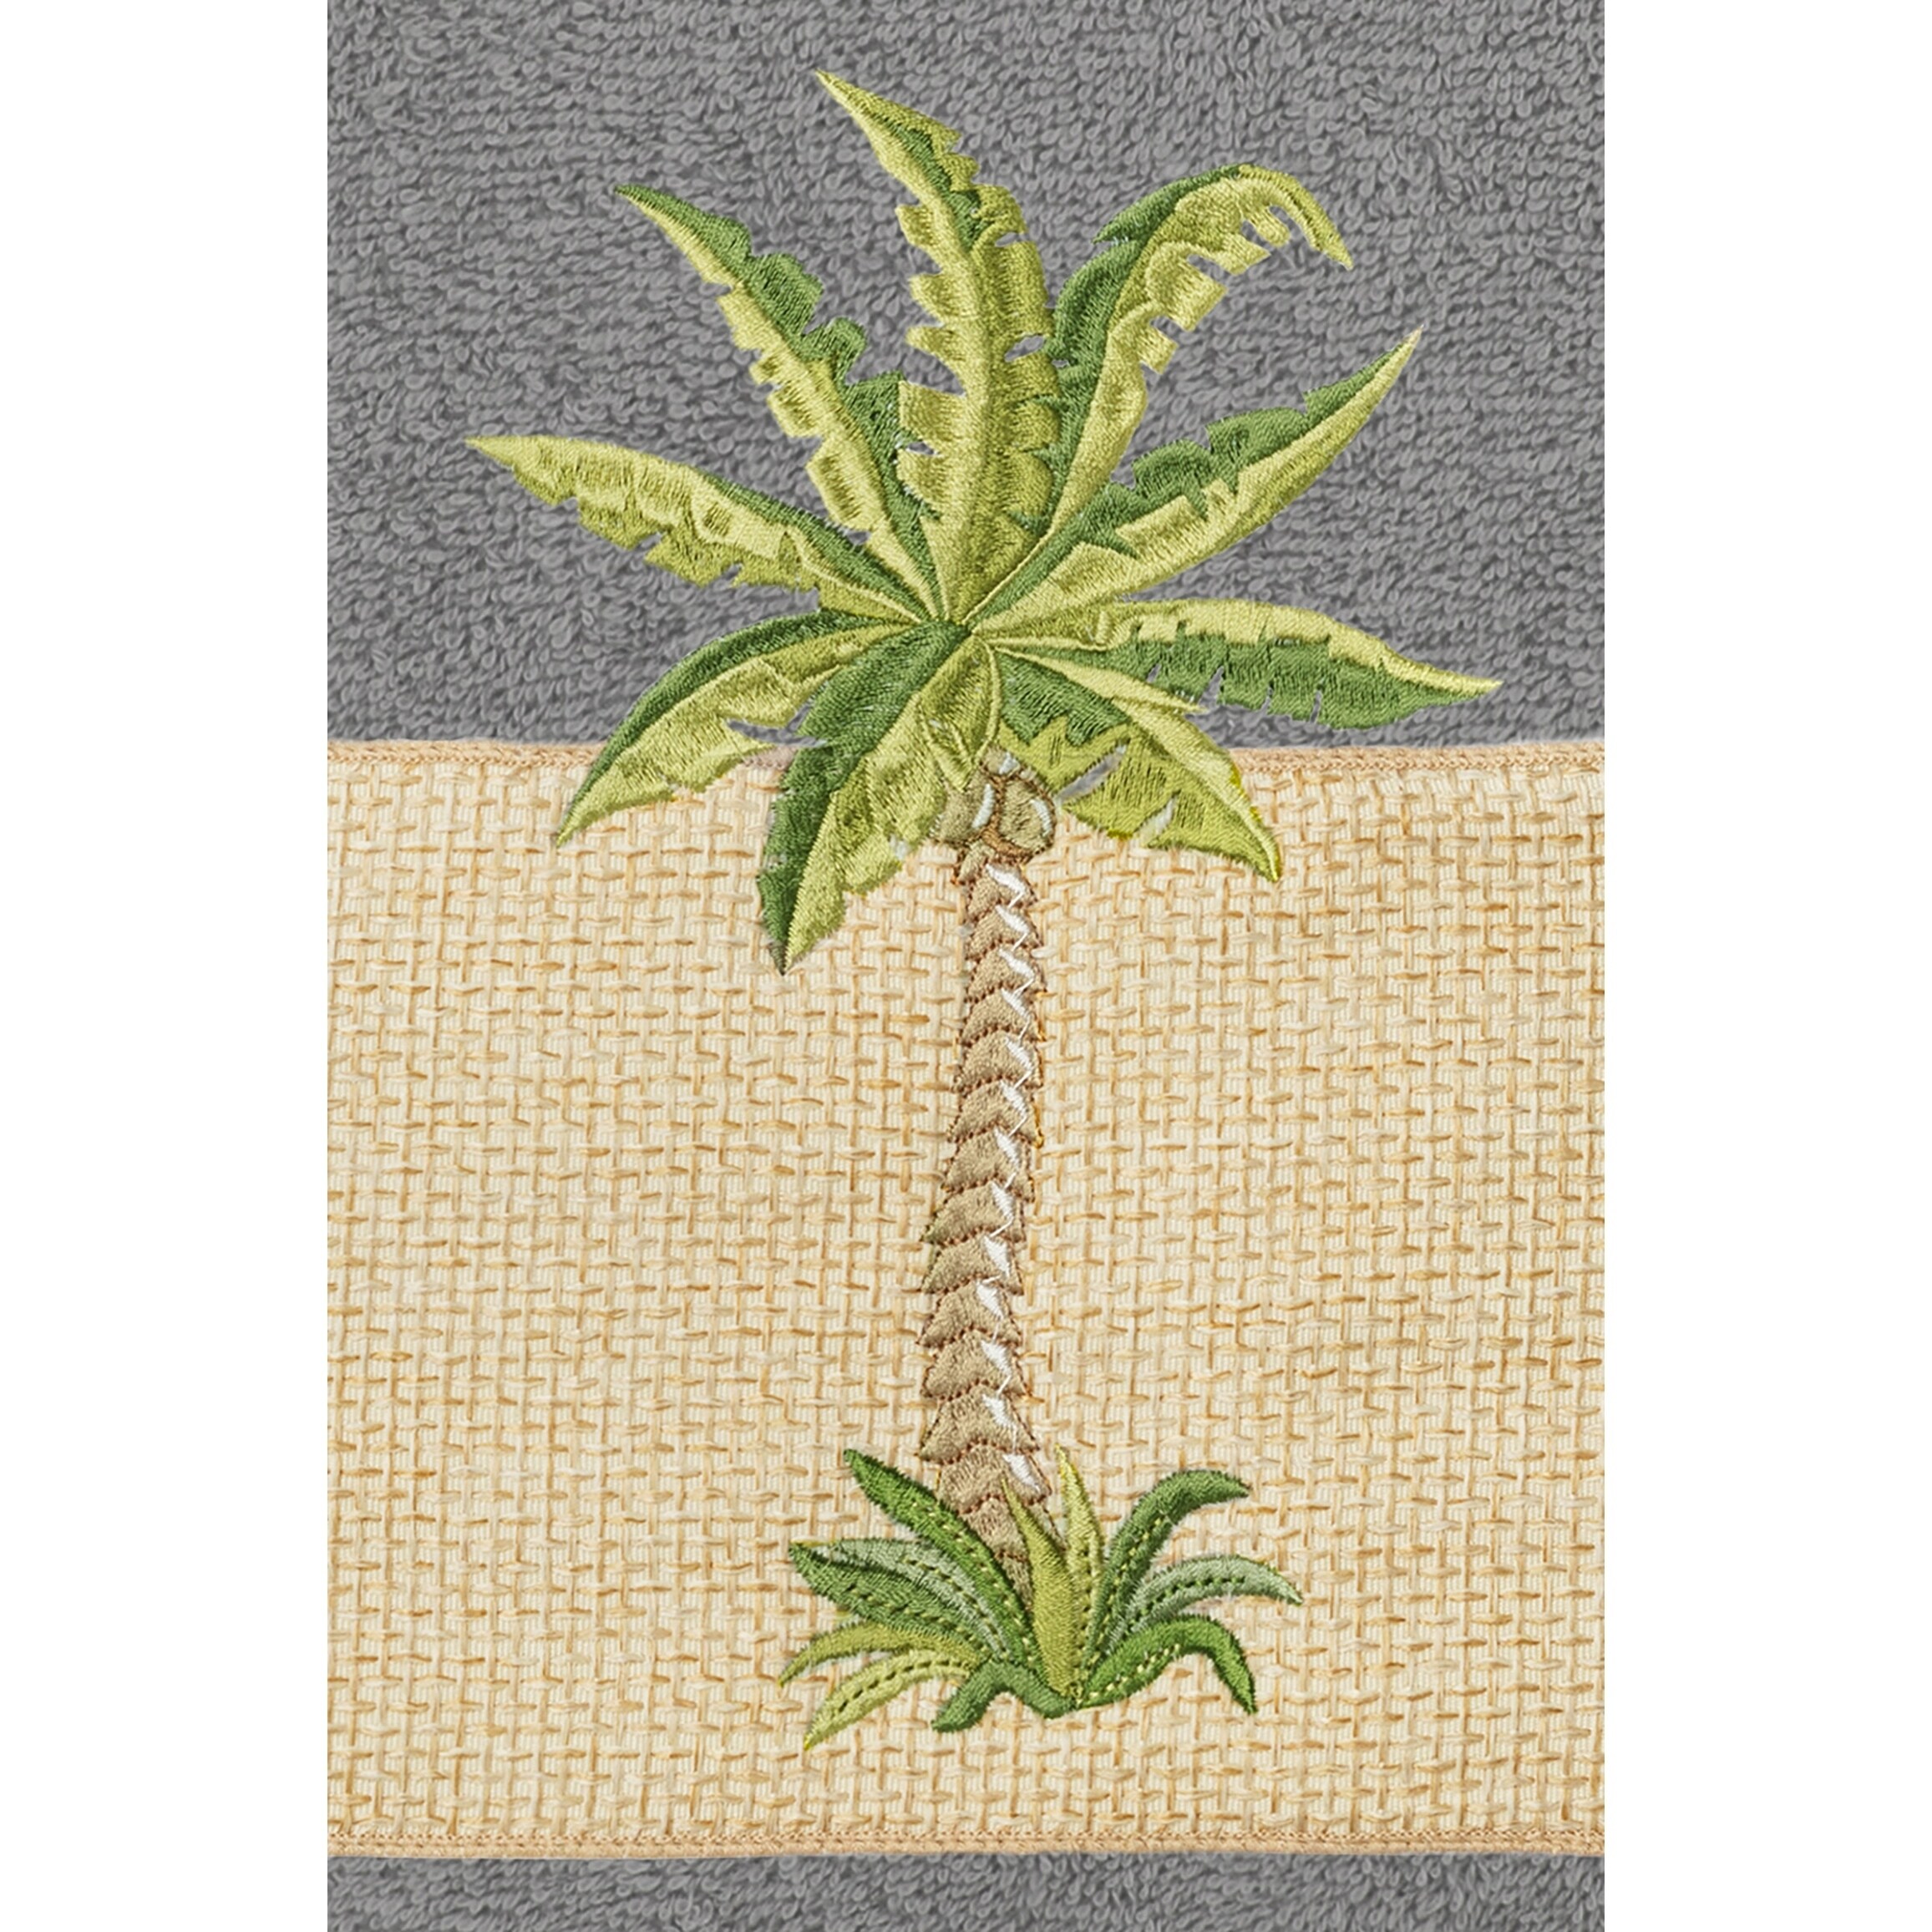 Authentic Hotel and Spa Turkish Cotton Palm Tree Embroidered Charcoal Grey Bath Towels (Set of 2)